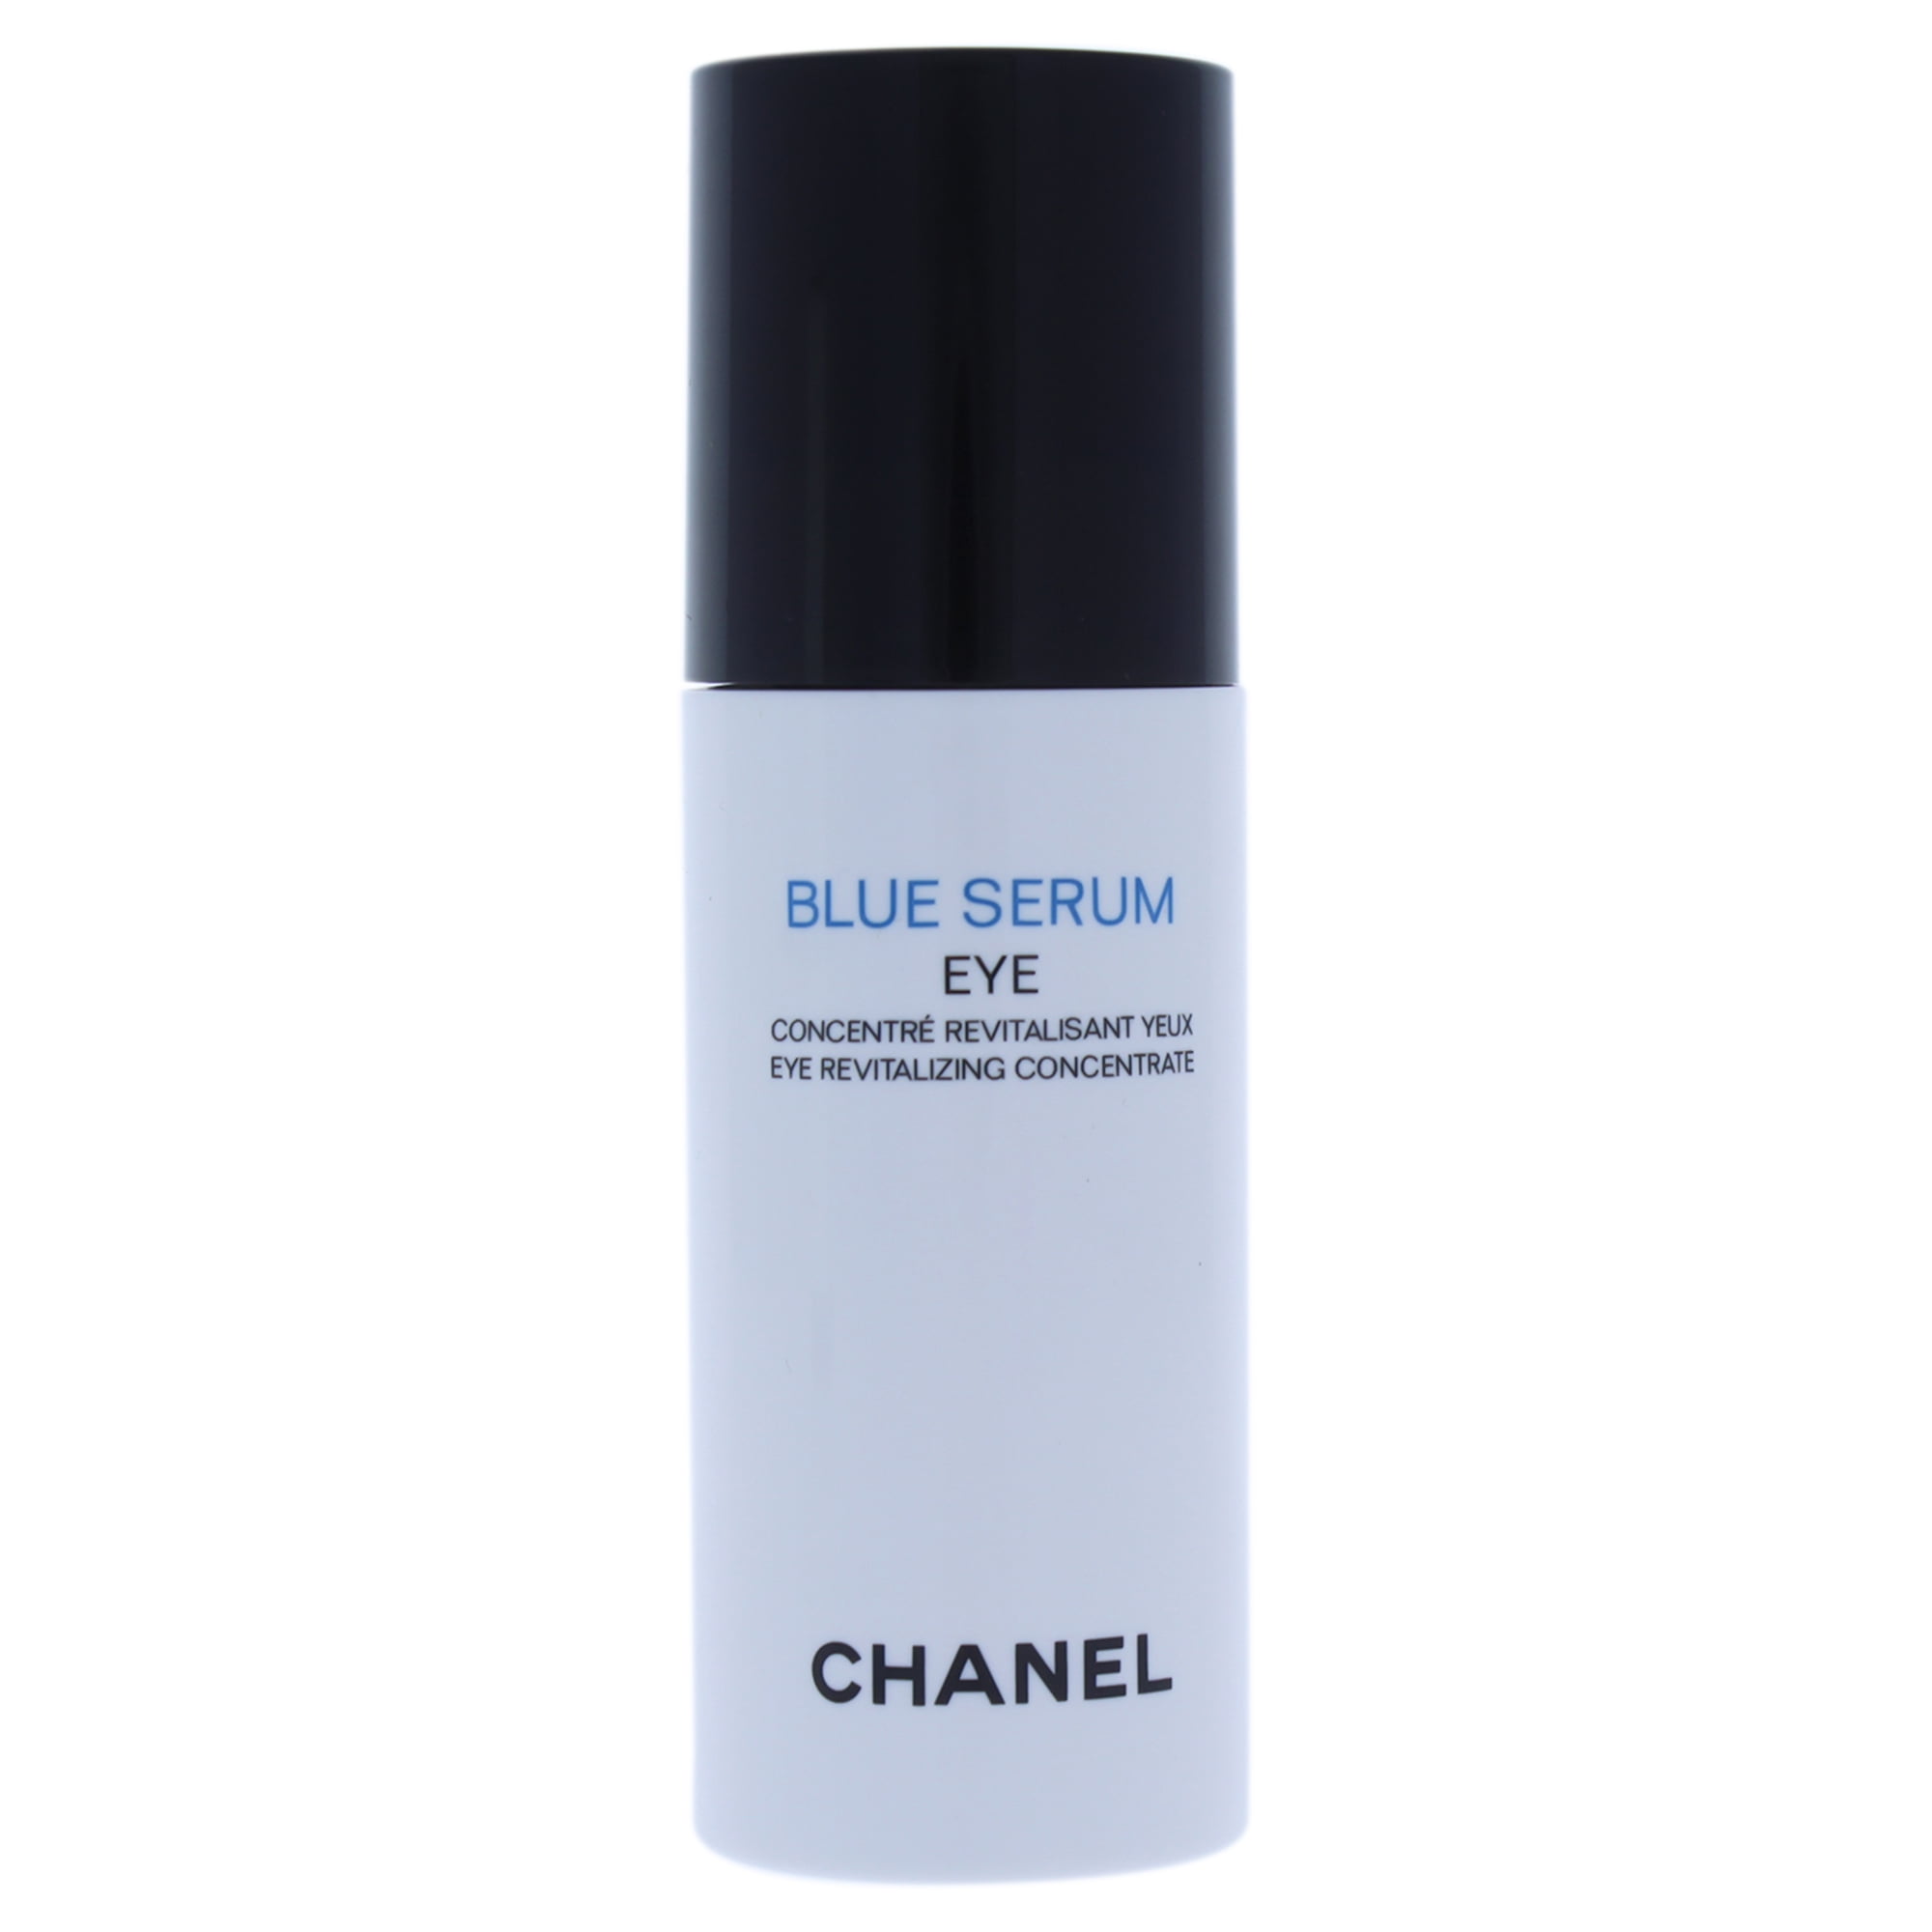 Blue Serum Eye Revitalizing Concentrate by Chanel for Unisex - 0.5 oz Serum